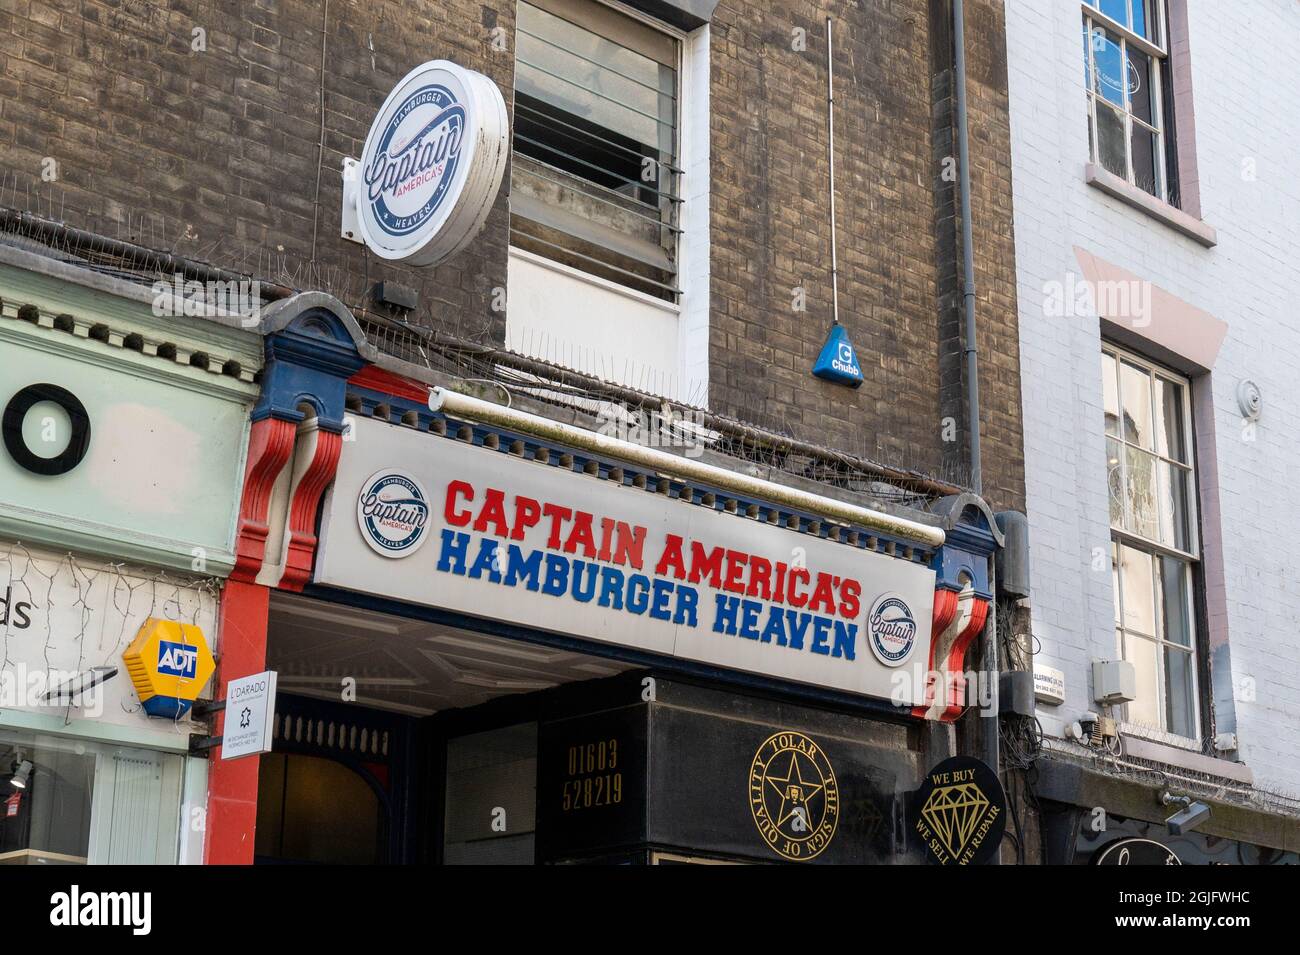 A view of the famous Captain Americas logo above the restaurant in Exchange Street Norwich Stock Photo